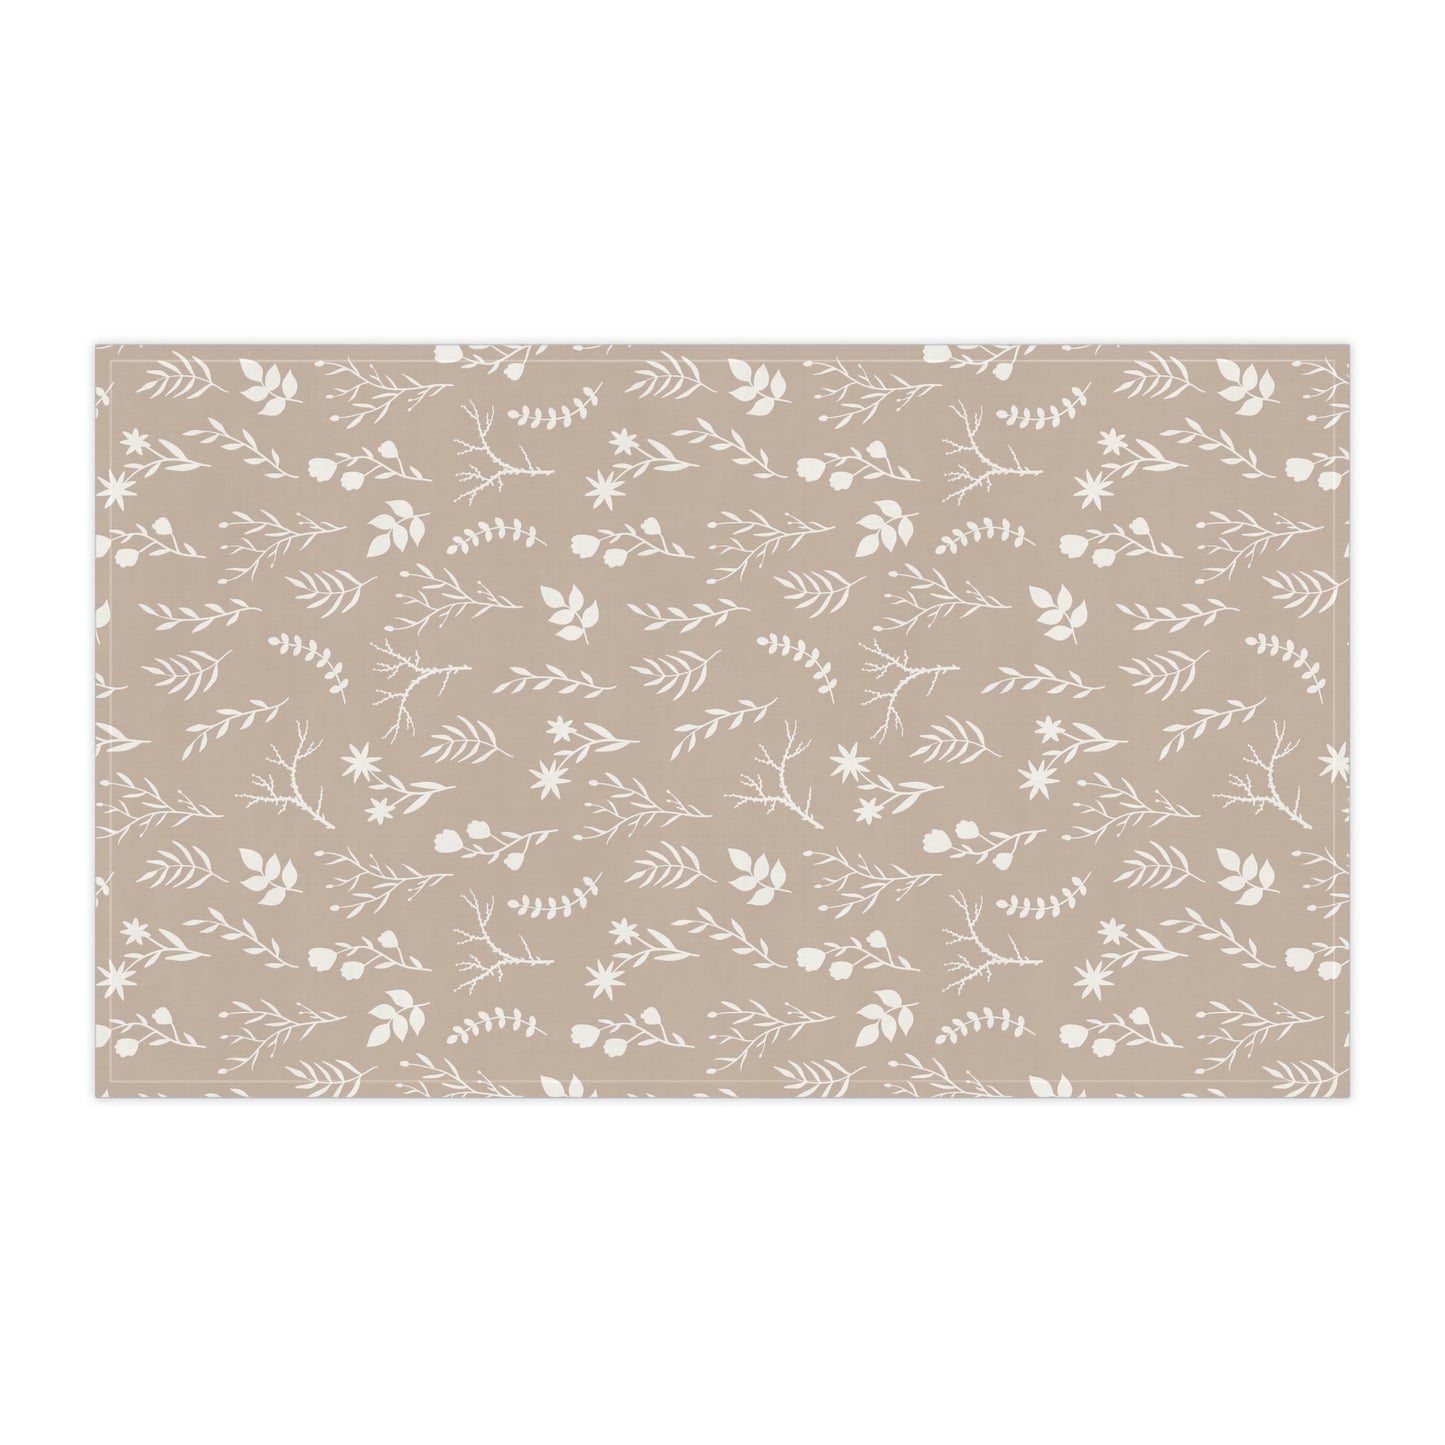 White and Taupe Floral Kitchen Tea Towel